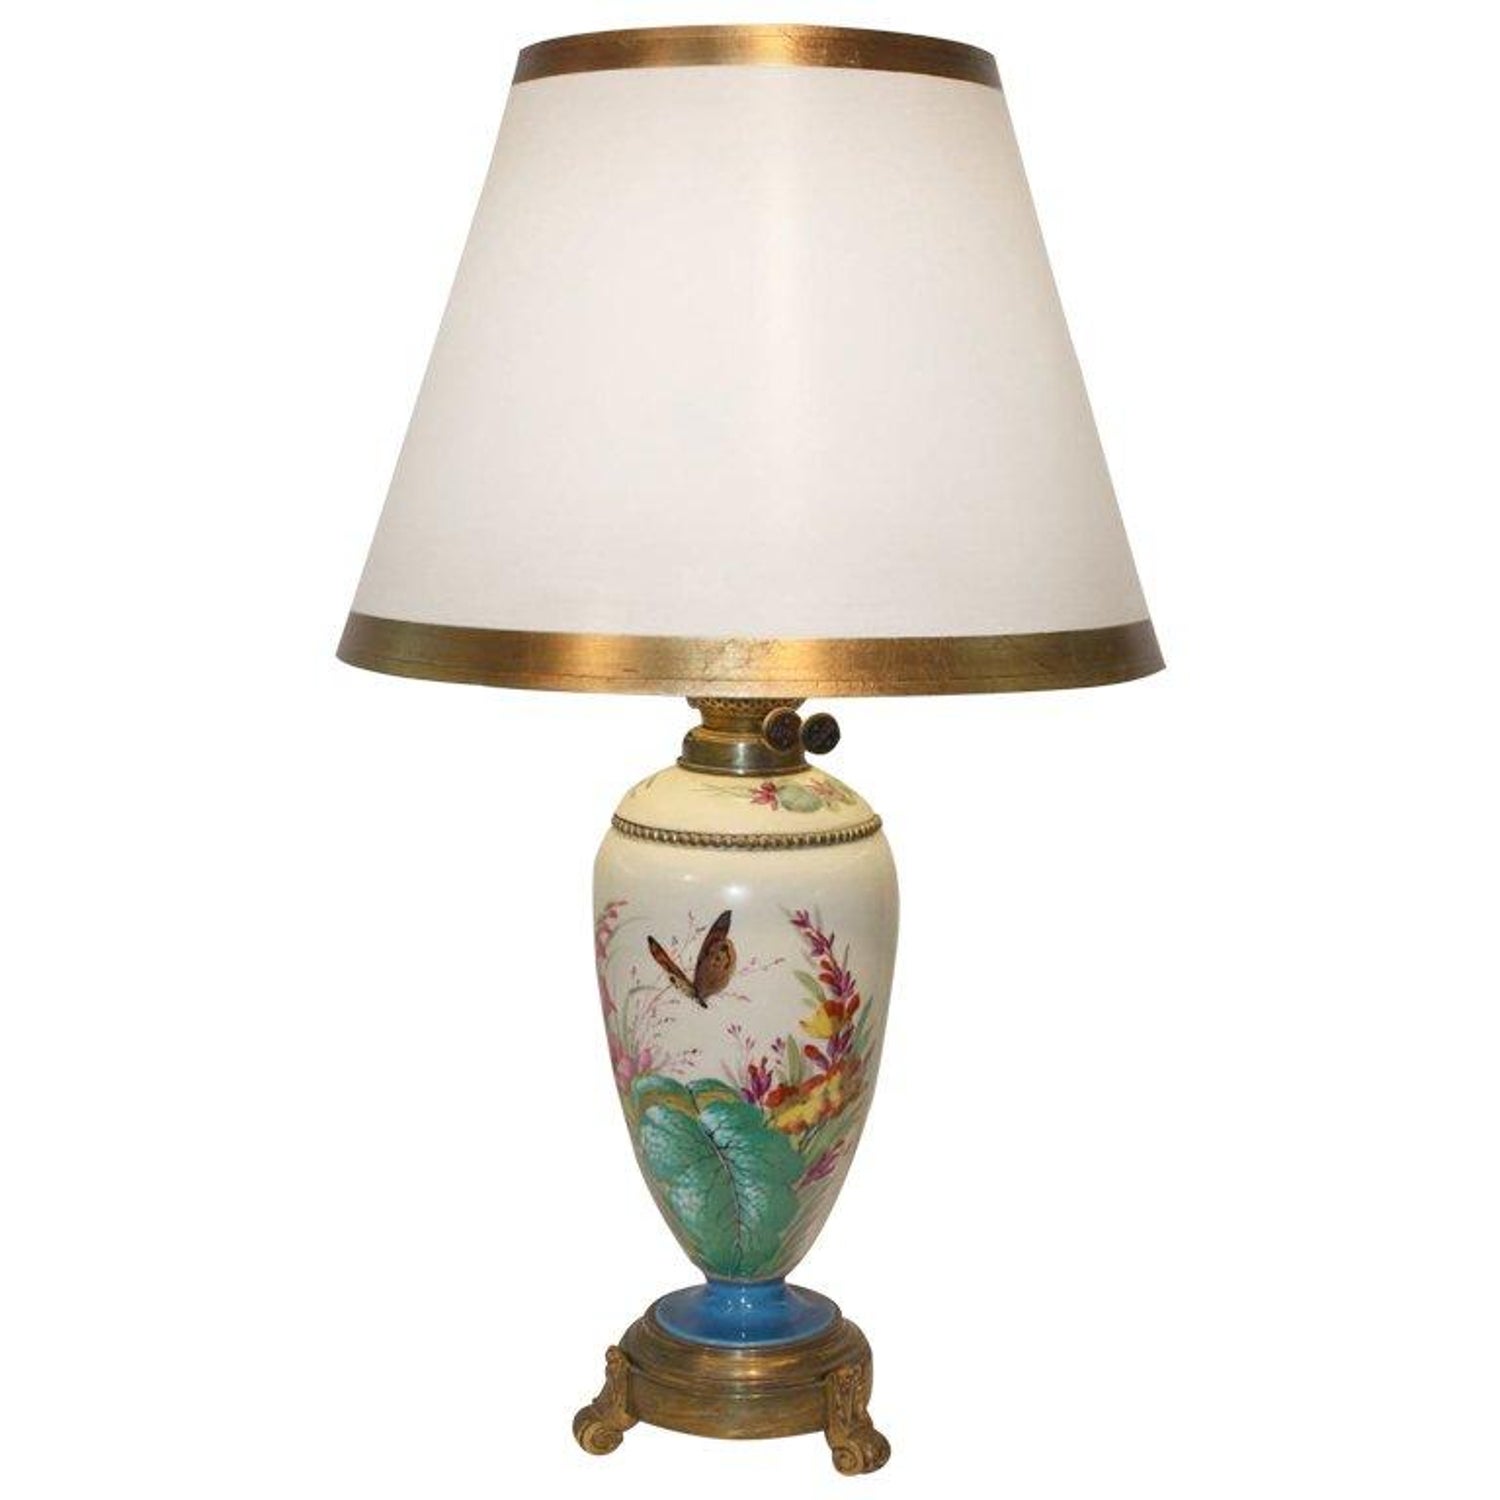 Victorian Porcelain Lamp For At, Vintage Table Lamps Montreal